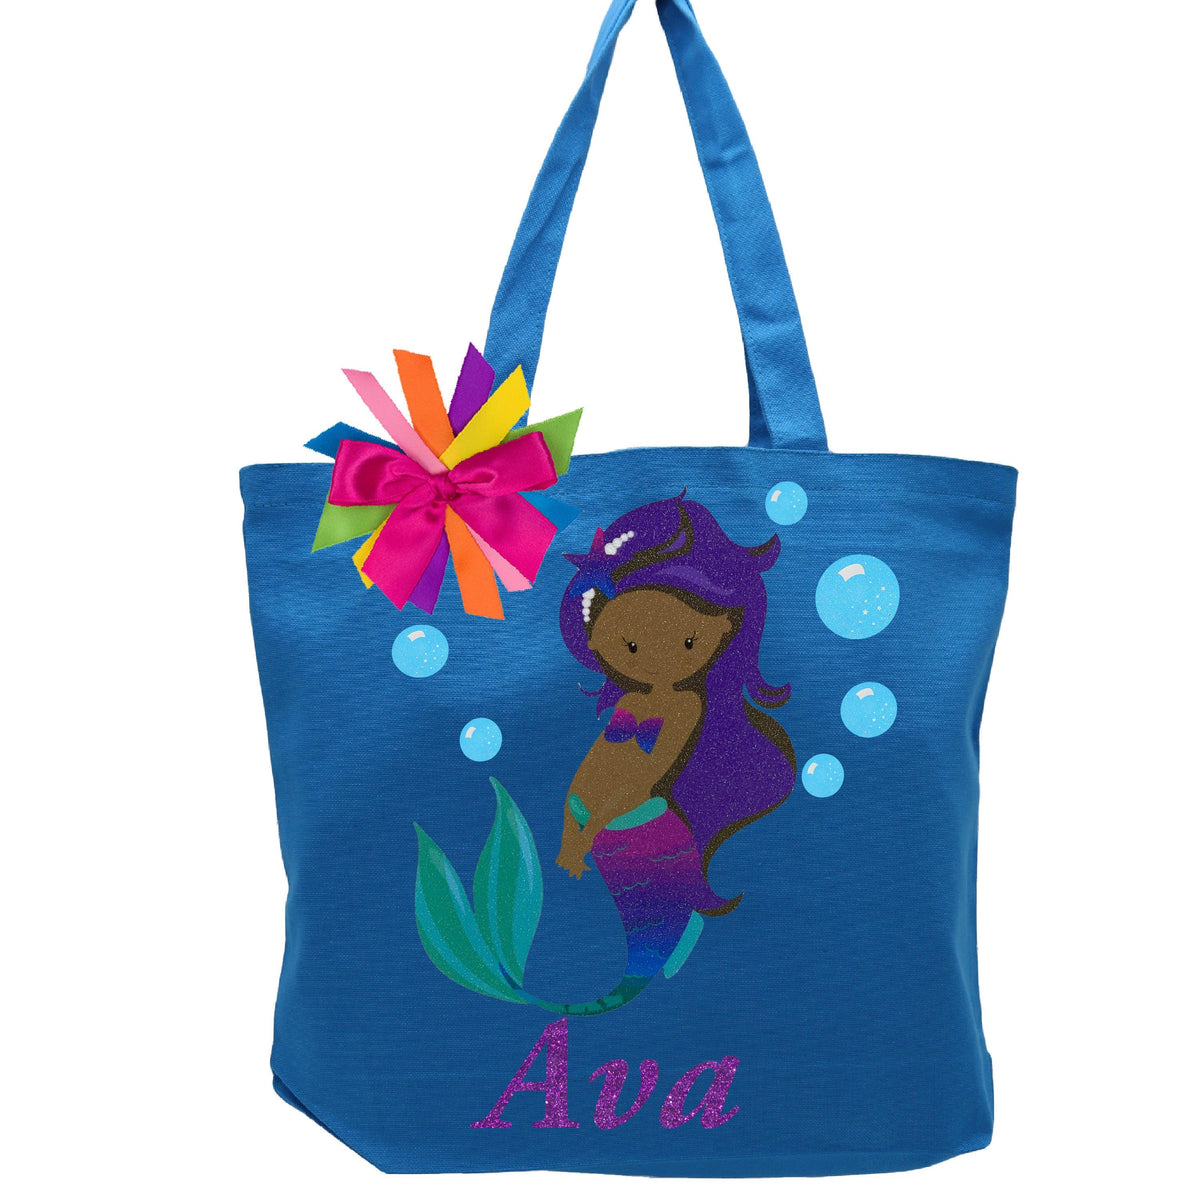 Personalized Sassy Mermaid Tote Bag for Kids